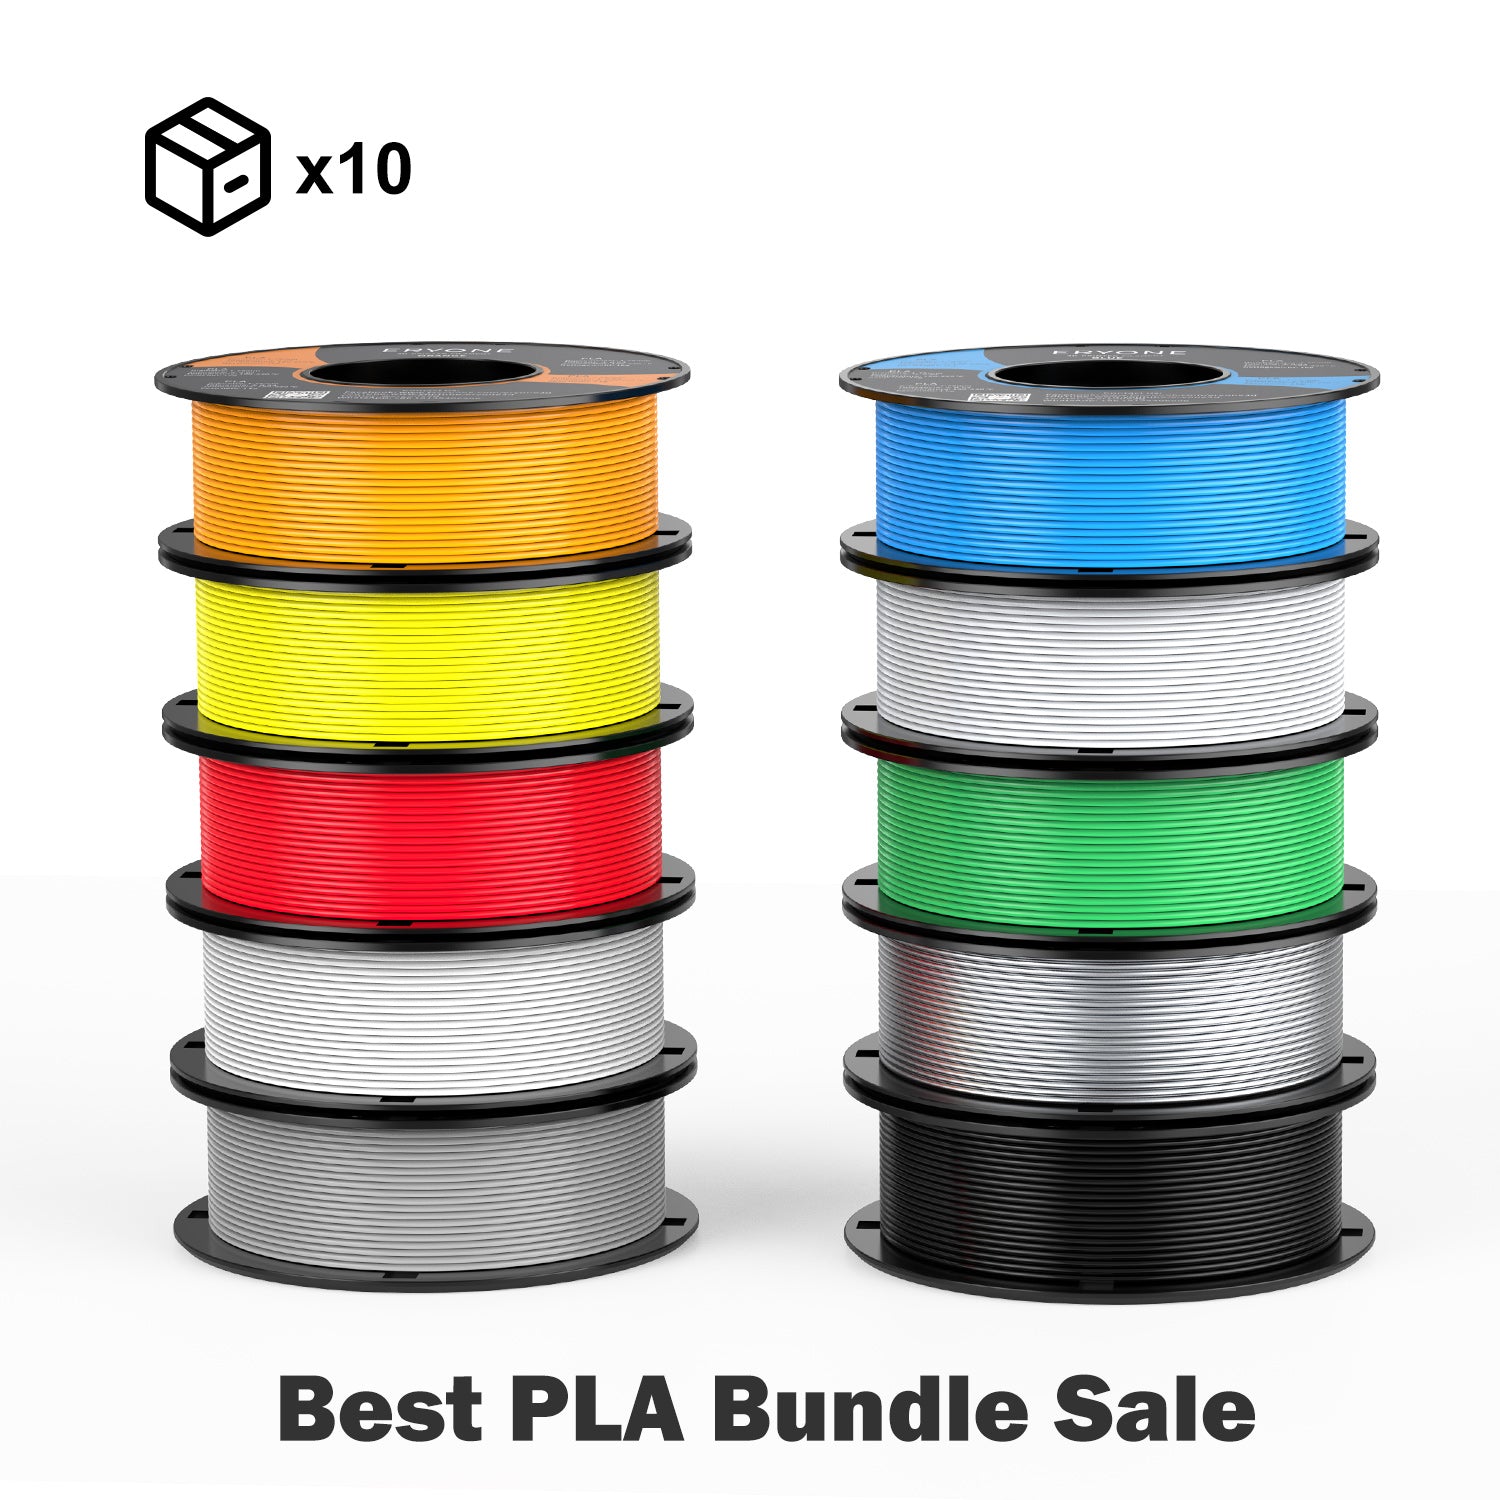 ERYONE/Cperprise Pack x10 PLA ​​1kg each +FREE SHIPPING(MOQ:10rolls can mix color)